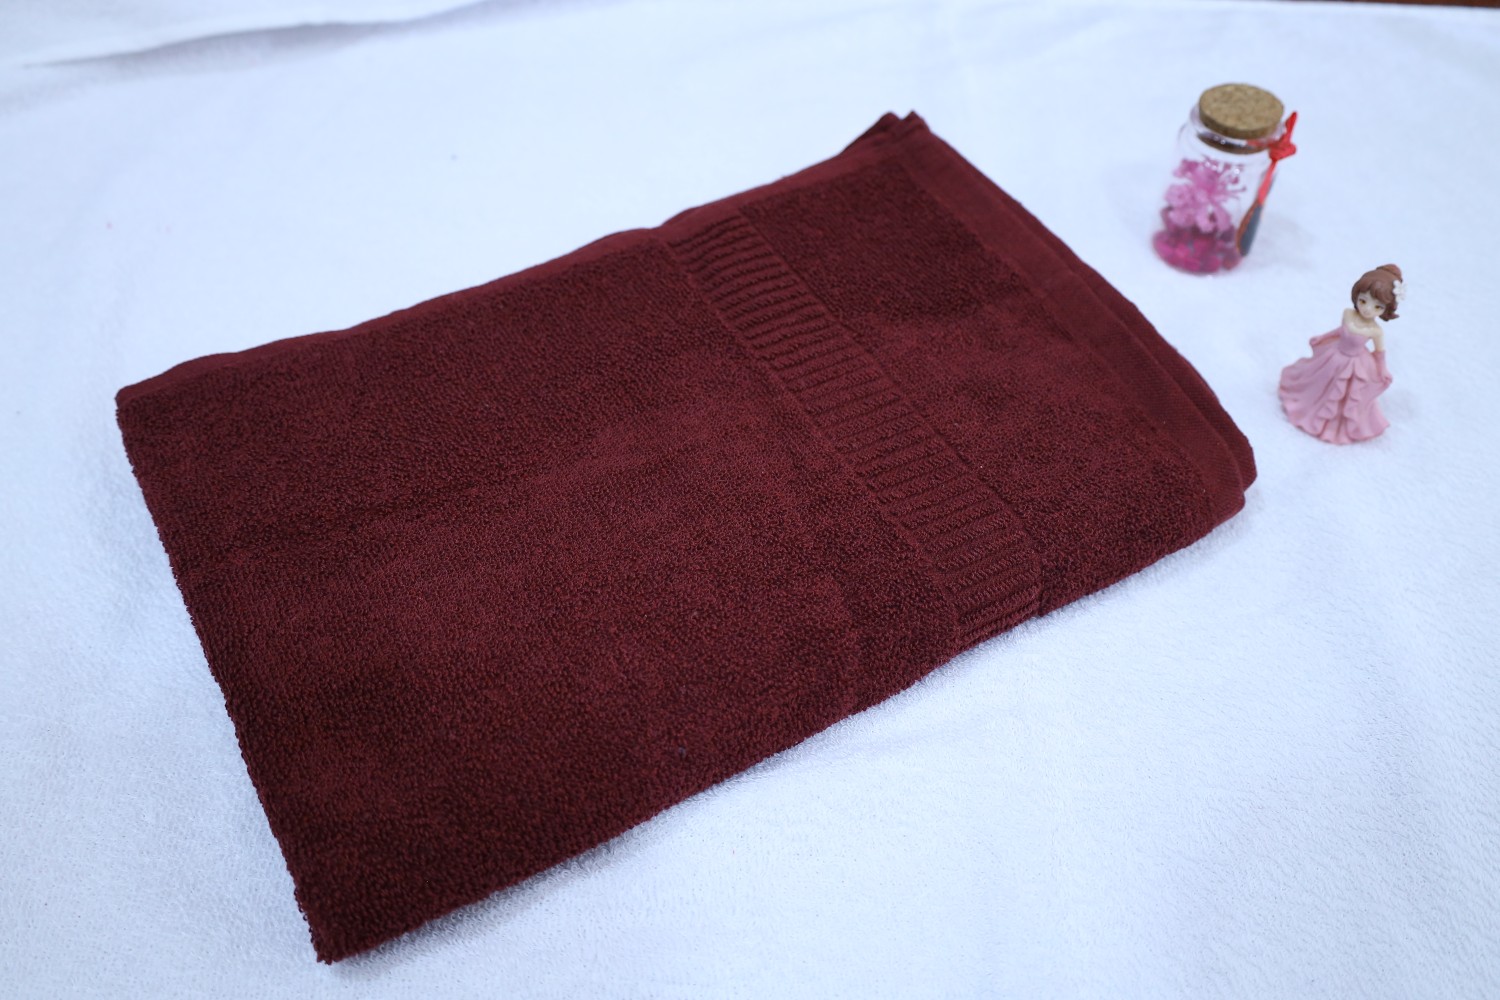 Taurusent Super Soft 100% Cotton High Absorbing Turkey Bath Towel, Size: 30x60 inches (450 GSM) - Pack of 1(MAROON)